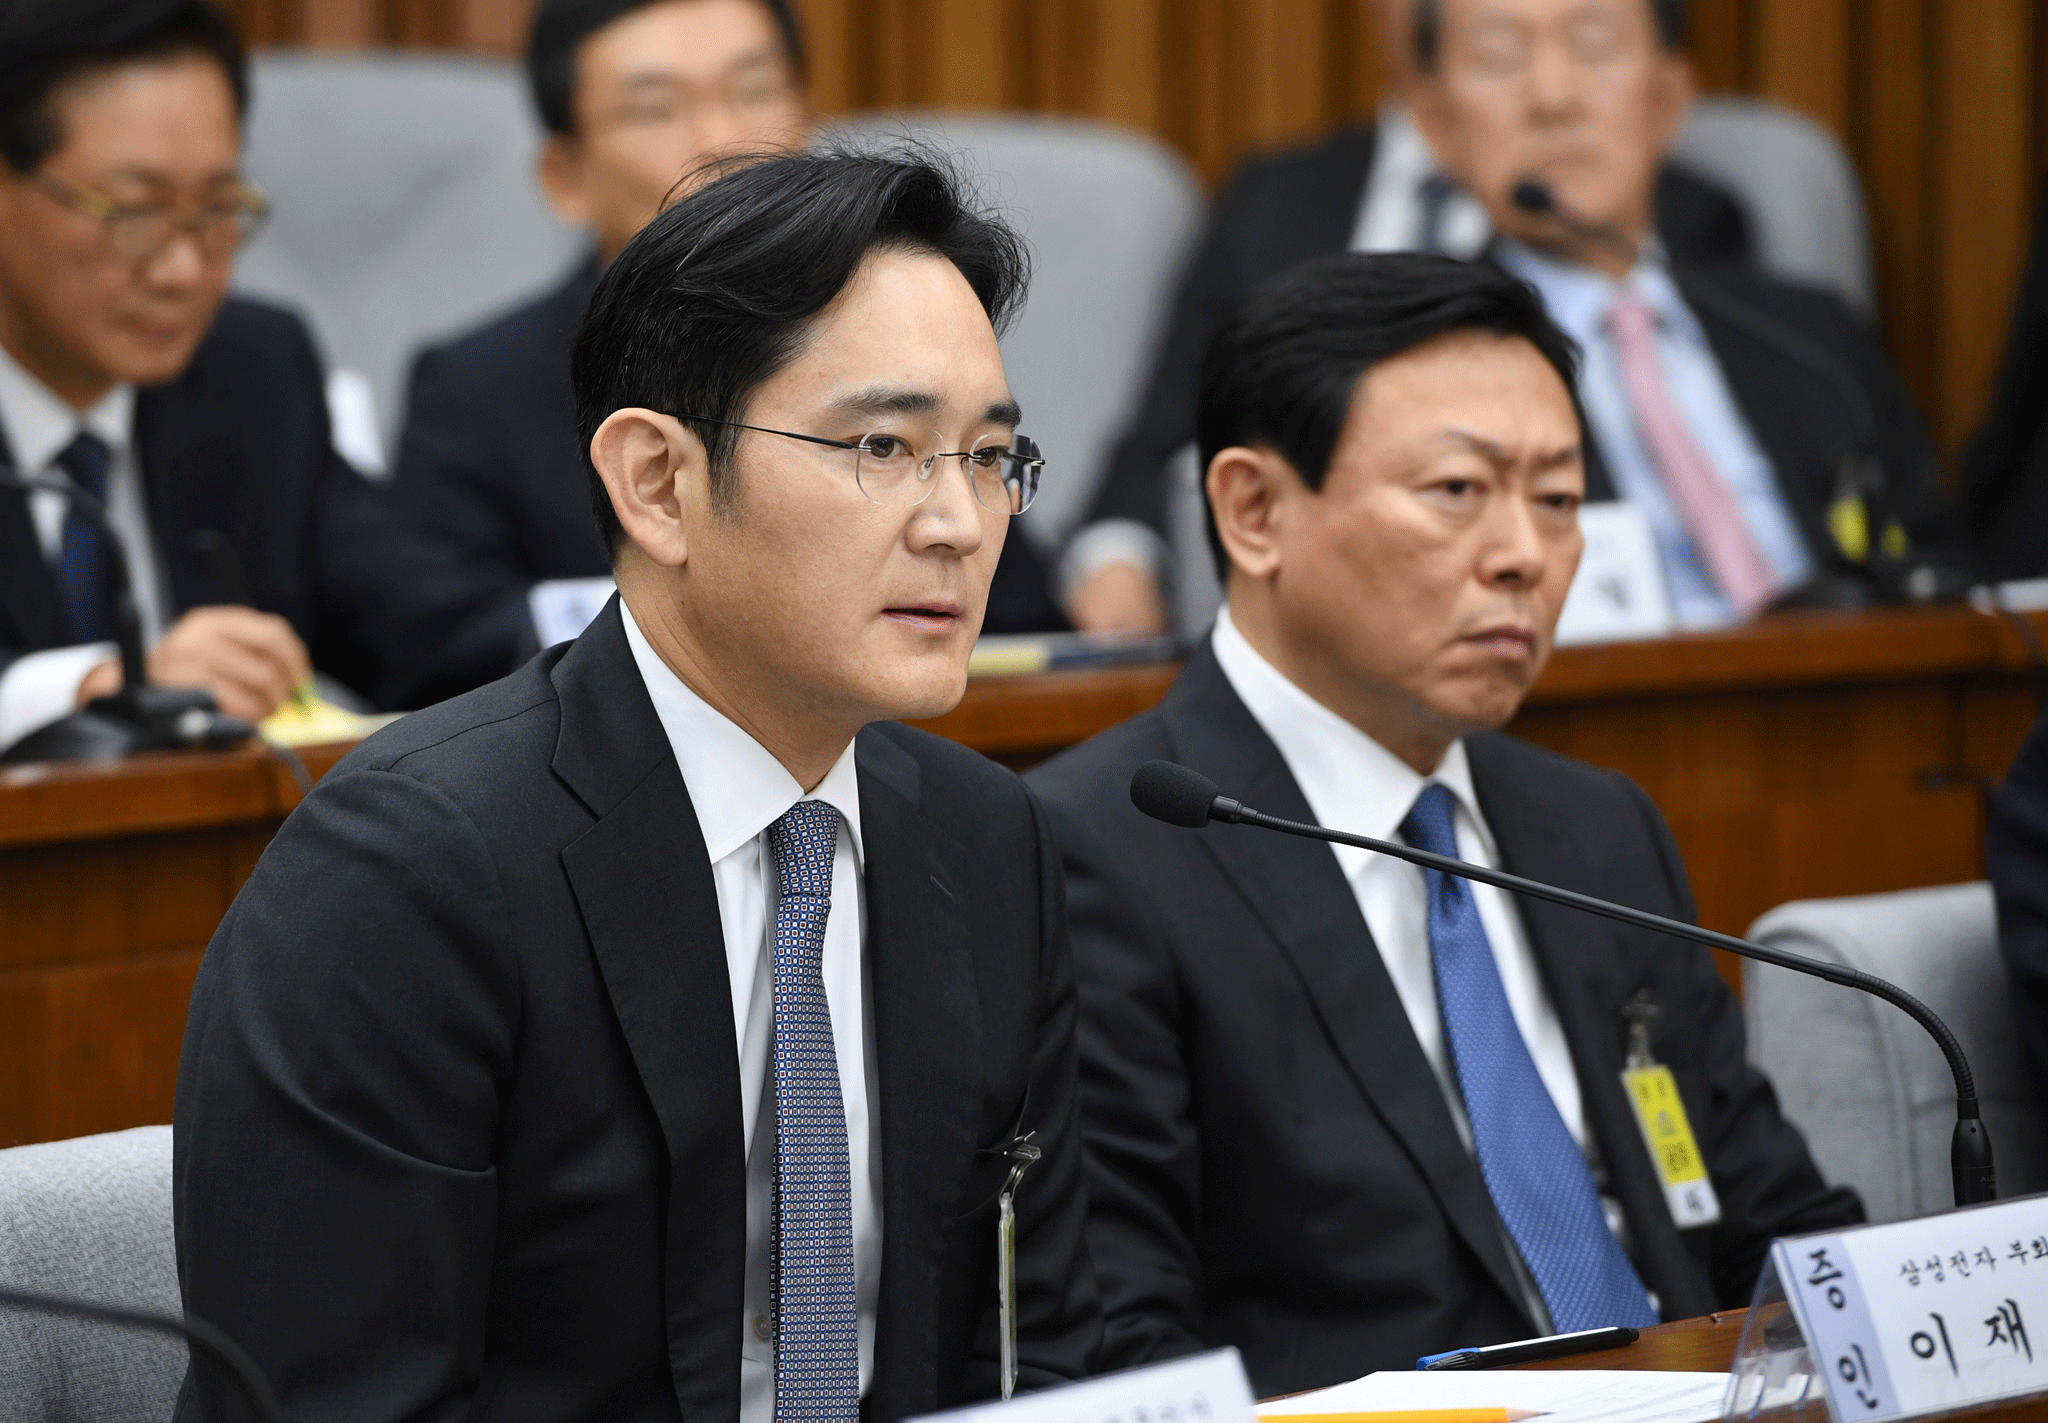 Samsung Group's heir-apparent Lee Jae-yong (L) answers a question as Lotte Group Chairman Shin Dong-Bin (R) listens during a parliamentary probe into a scandal engulfing President Park Geun-Hye at the National Assembly in Seoul on December 6, 2016